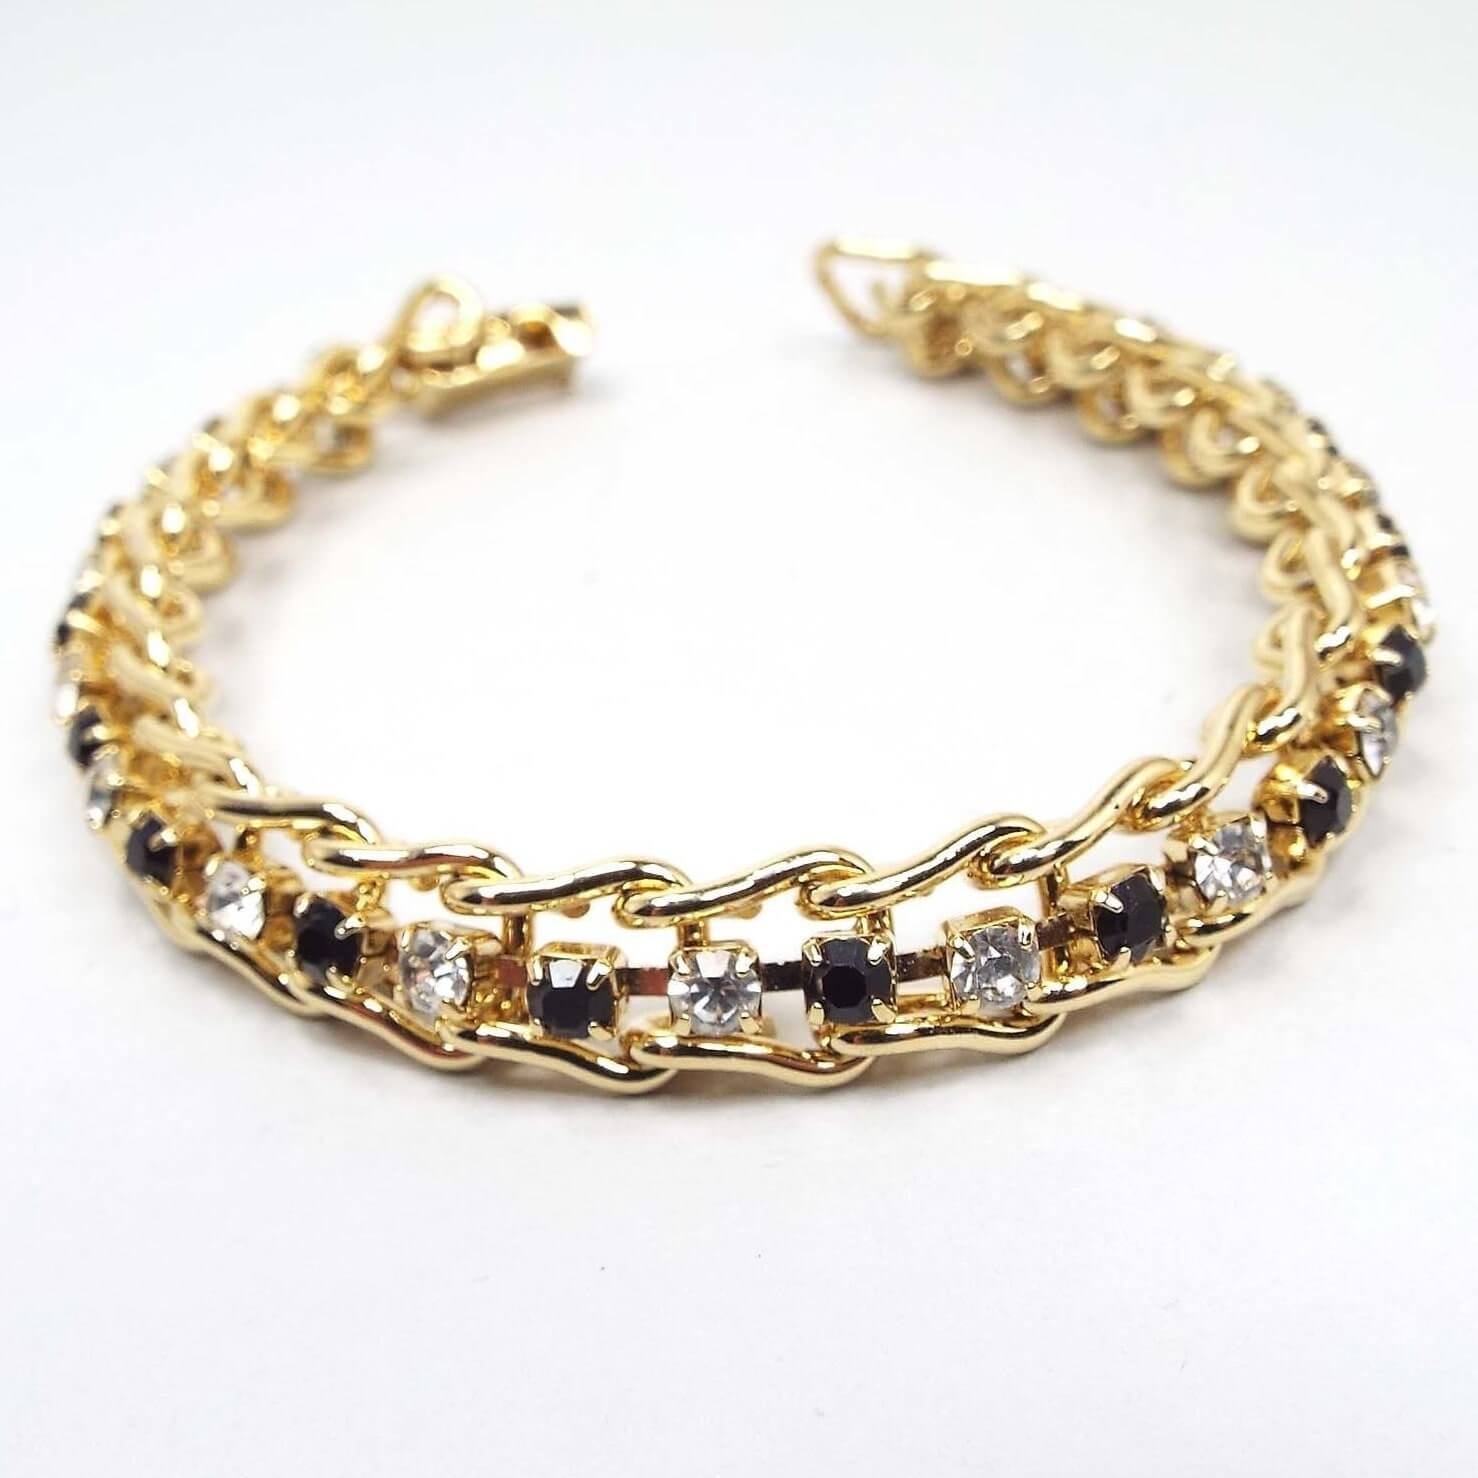 Front view of the retro vintage rhinestone bracelet. The metal is shiny gold tone in color and has sideways curved U shaped links. Inside each link is a small round rhinestone. The rhinestones alternate in color down the length of the bracelet in black and sparkling clear. There is a snap lock clasp at the end.